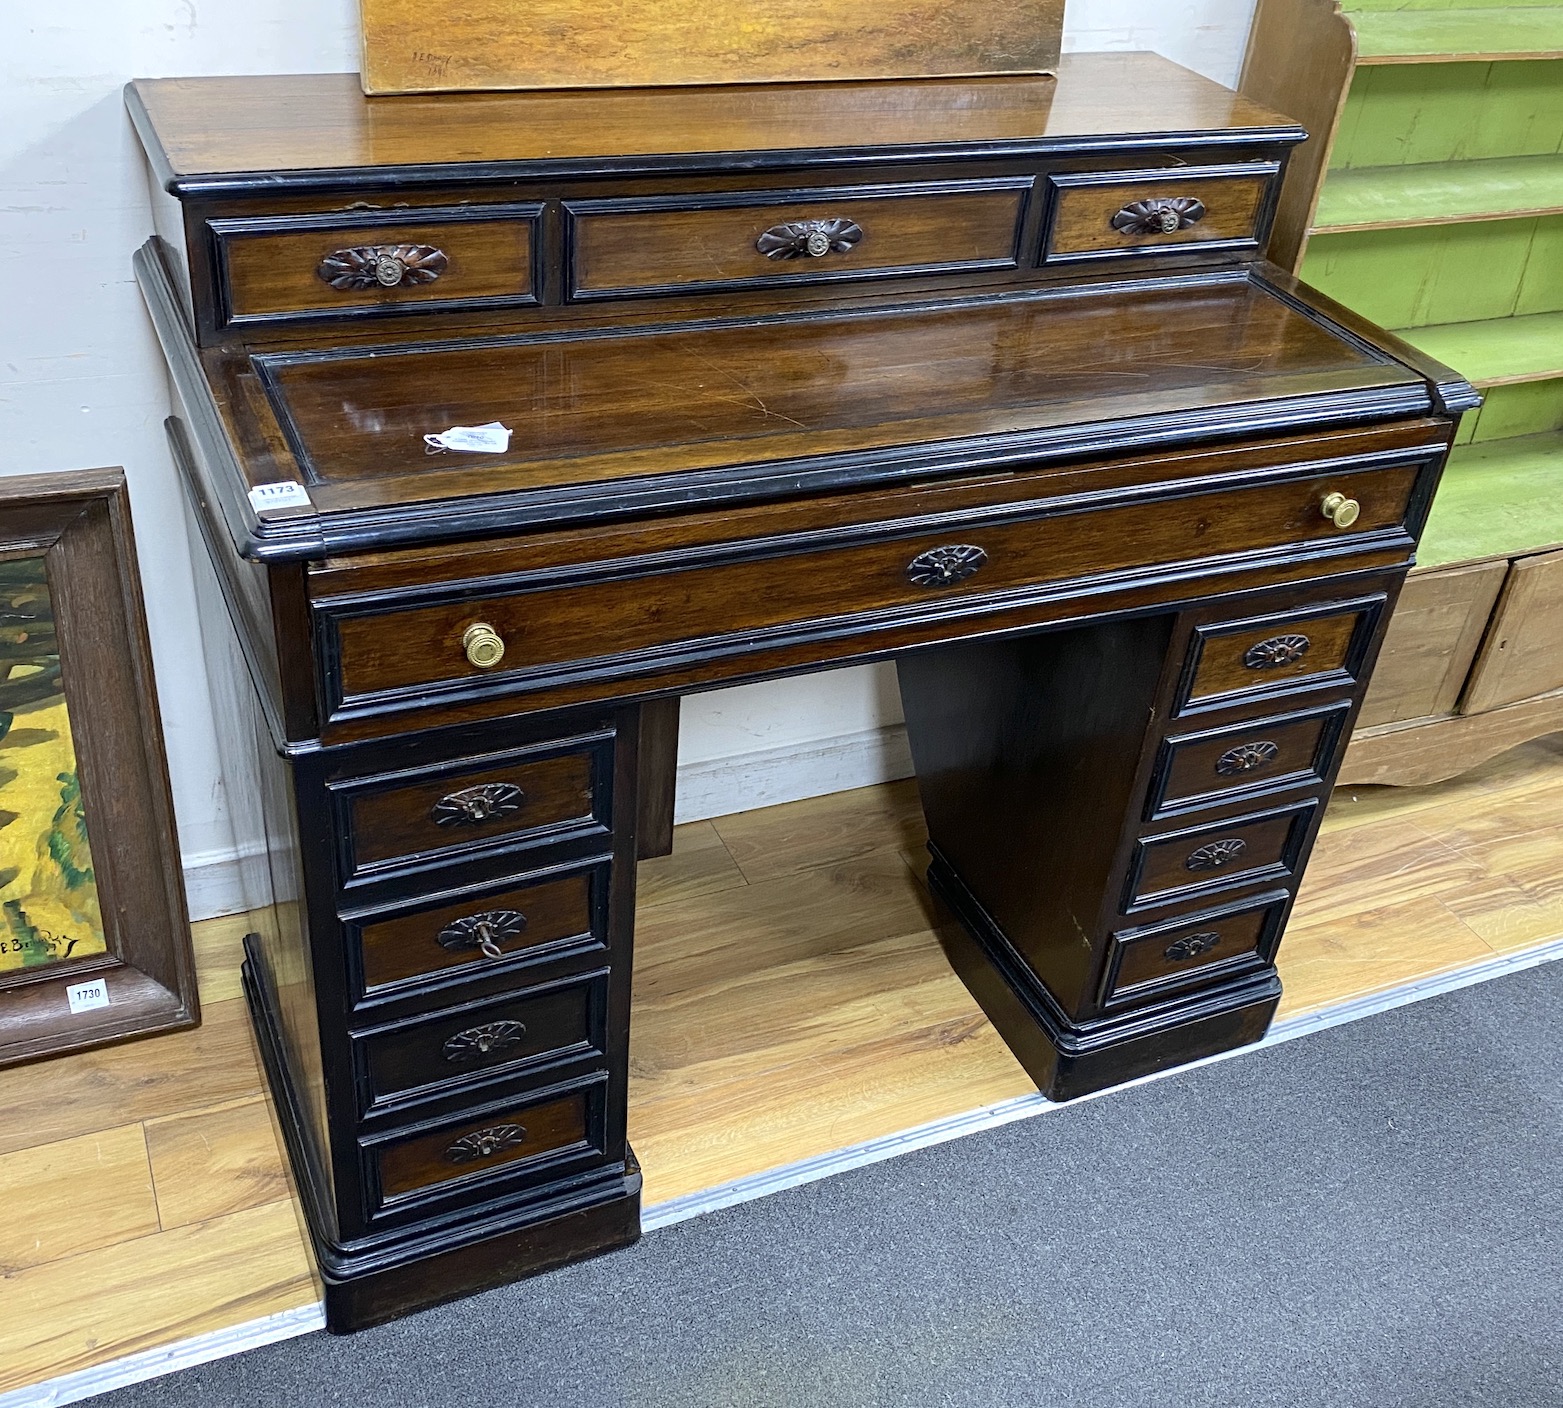 A 19th century mahogany secretaire desk, possibly from a ship, width 116cm, depth 64cm, height 105cm